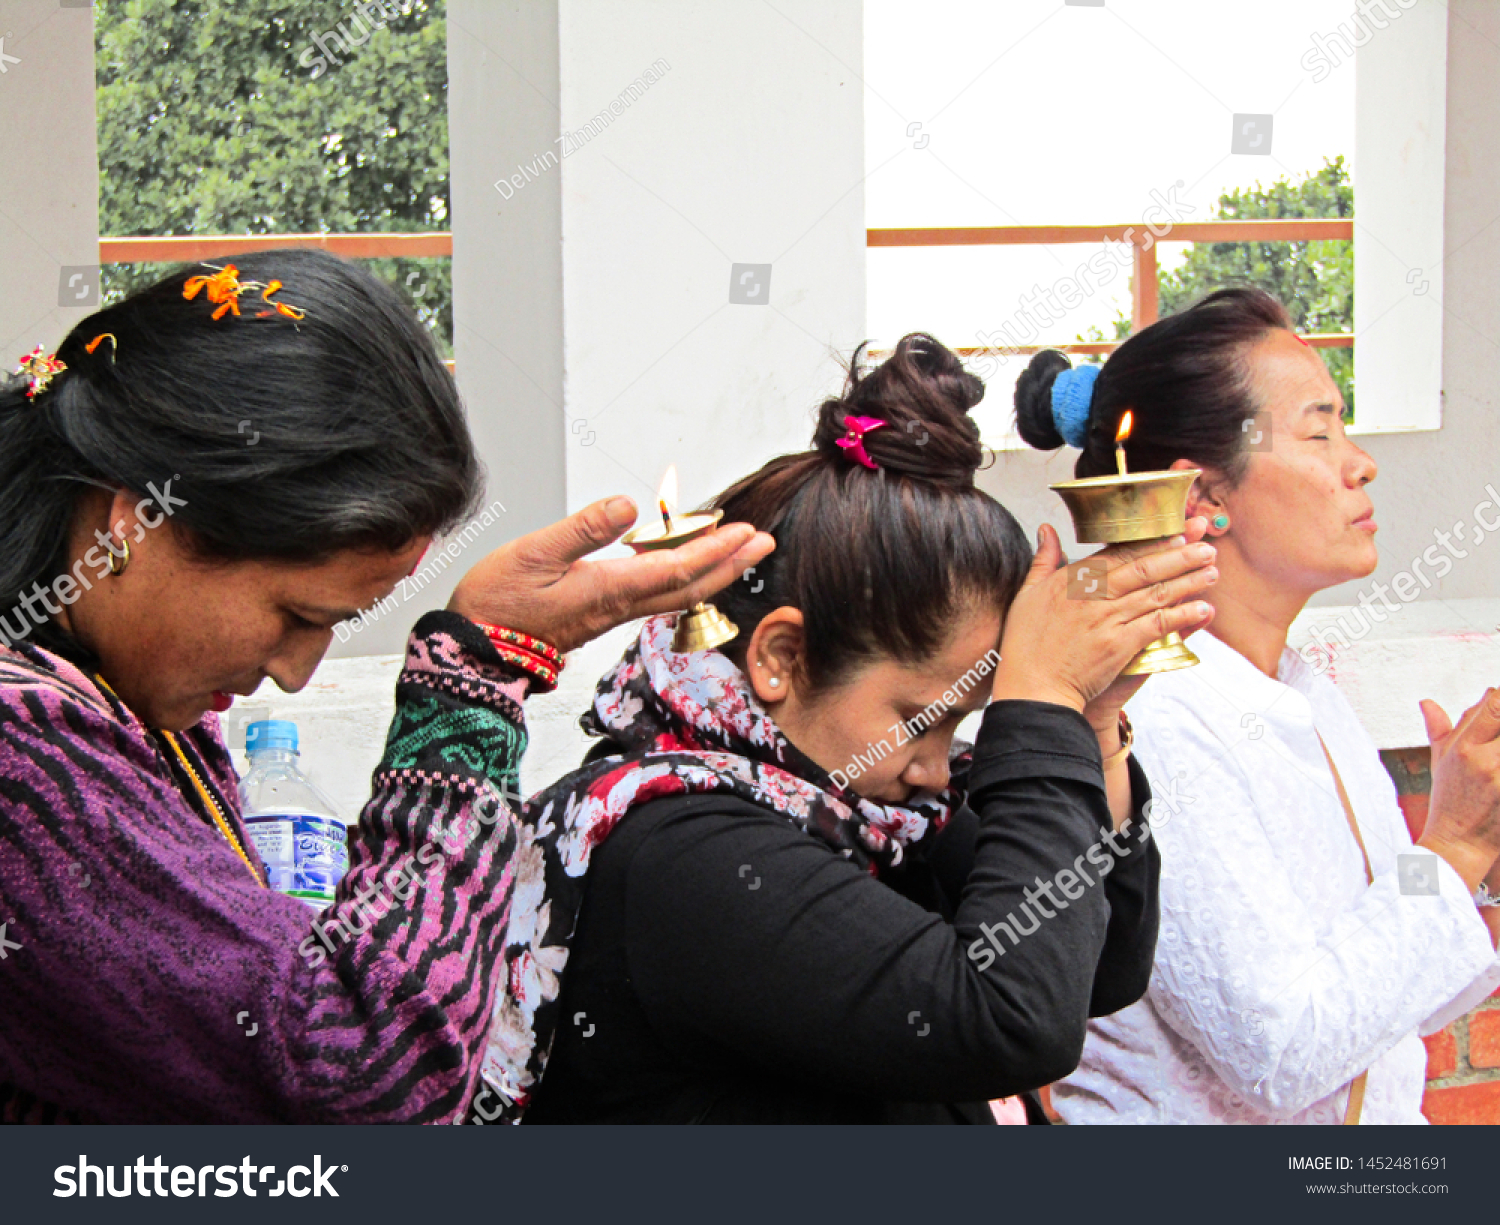 Chandragiri, Nepal - April 11 2018; Three women holding a candle for a religious ritual in Chandragiri, Nepal on April 11 2018 #1452481691